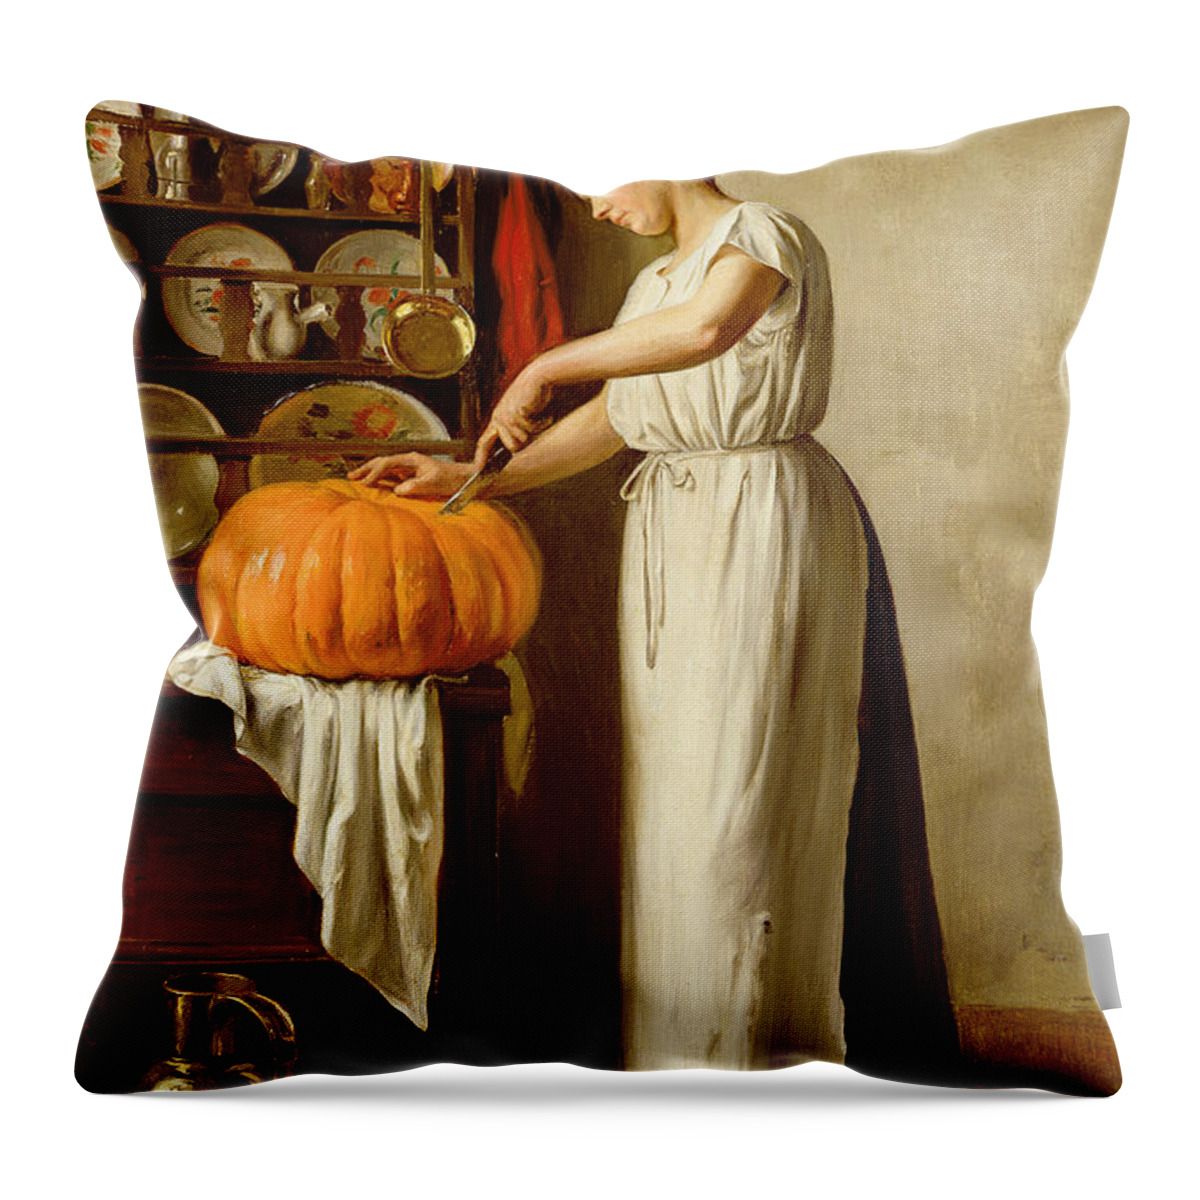 Interior; Female; Maid; Apron; Dresser; China; Copper Jug; Knife; Domestic; Food Preparation Throw Pillow featuring the painting Cutting the Pumpkin by Franck-Antoine Bail